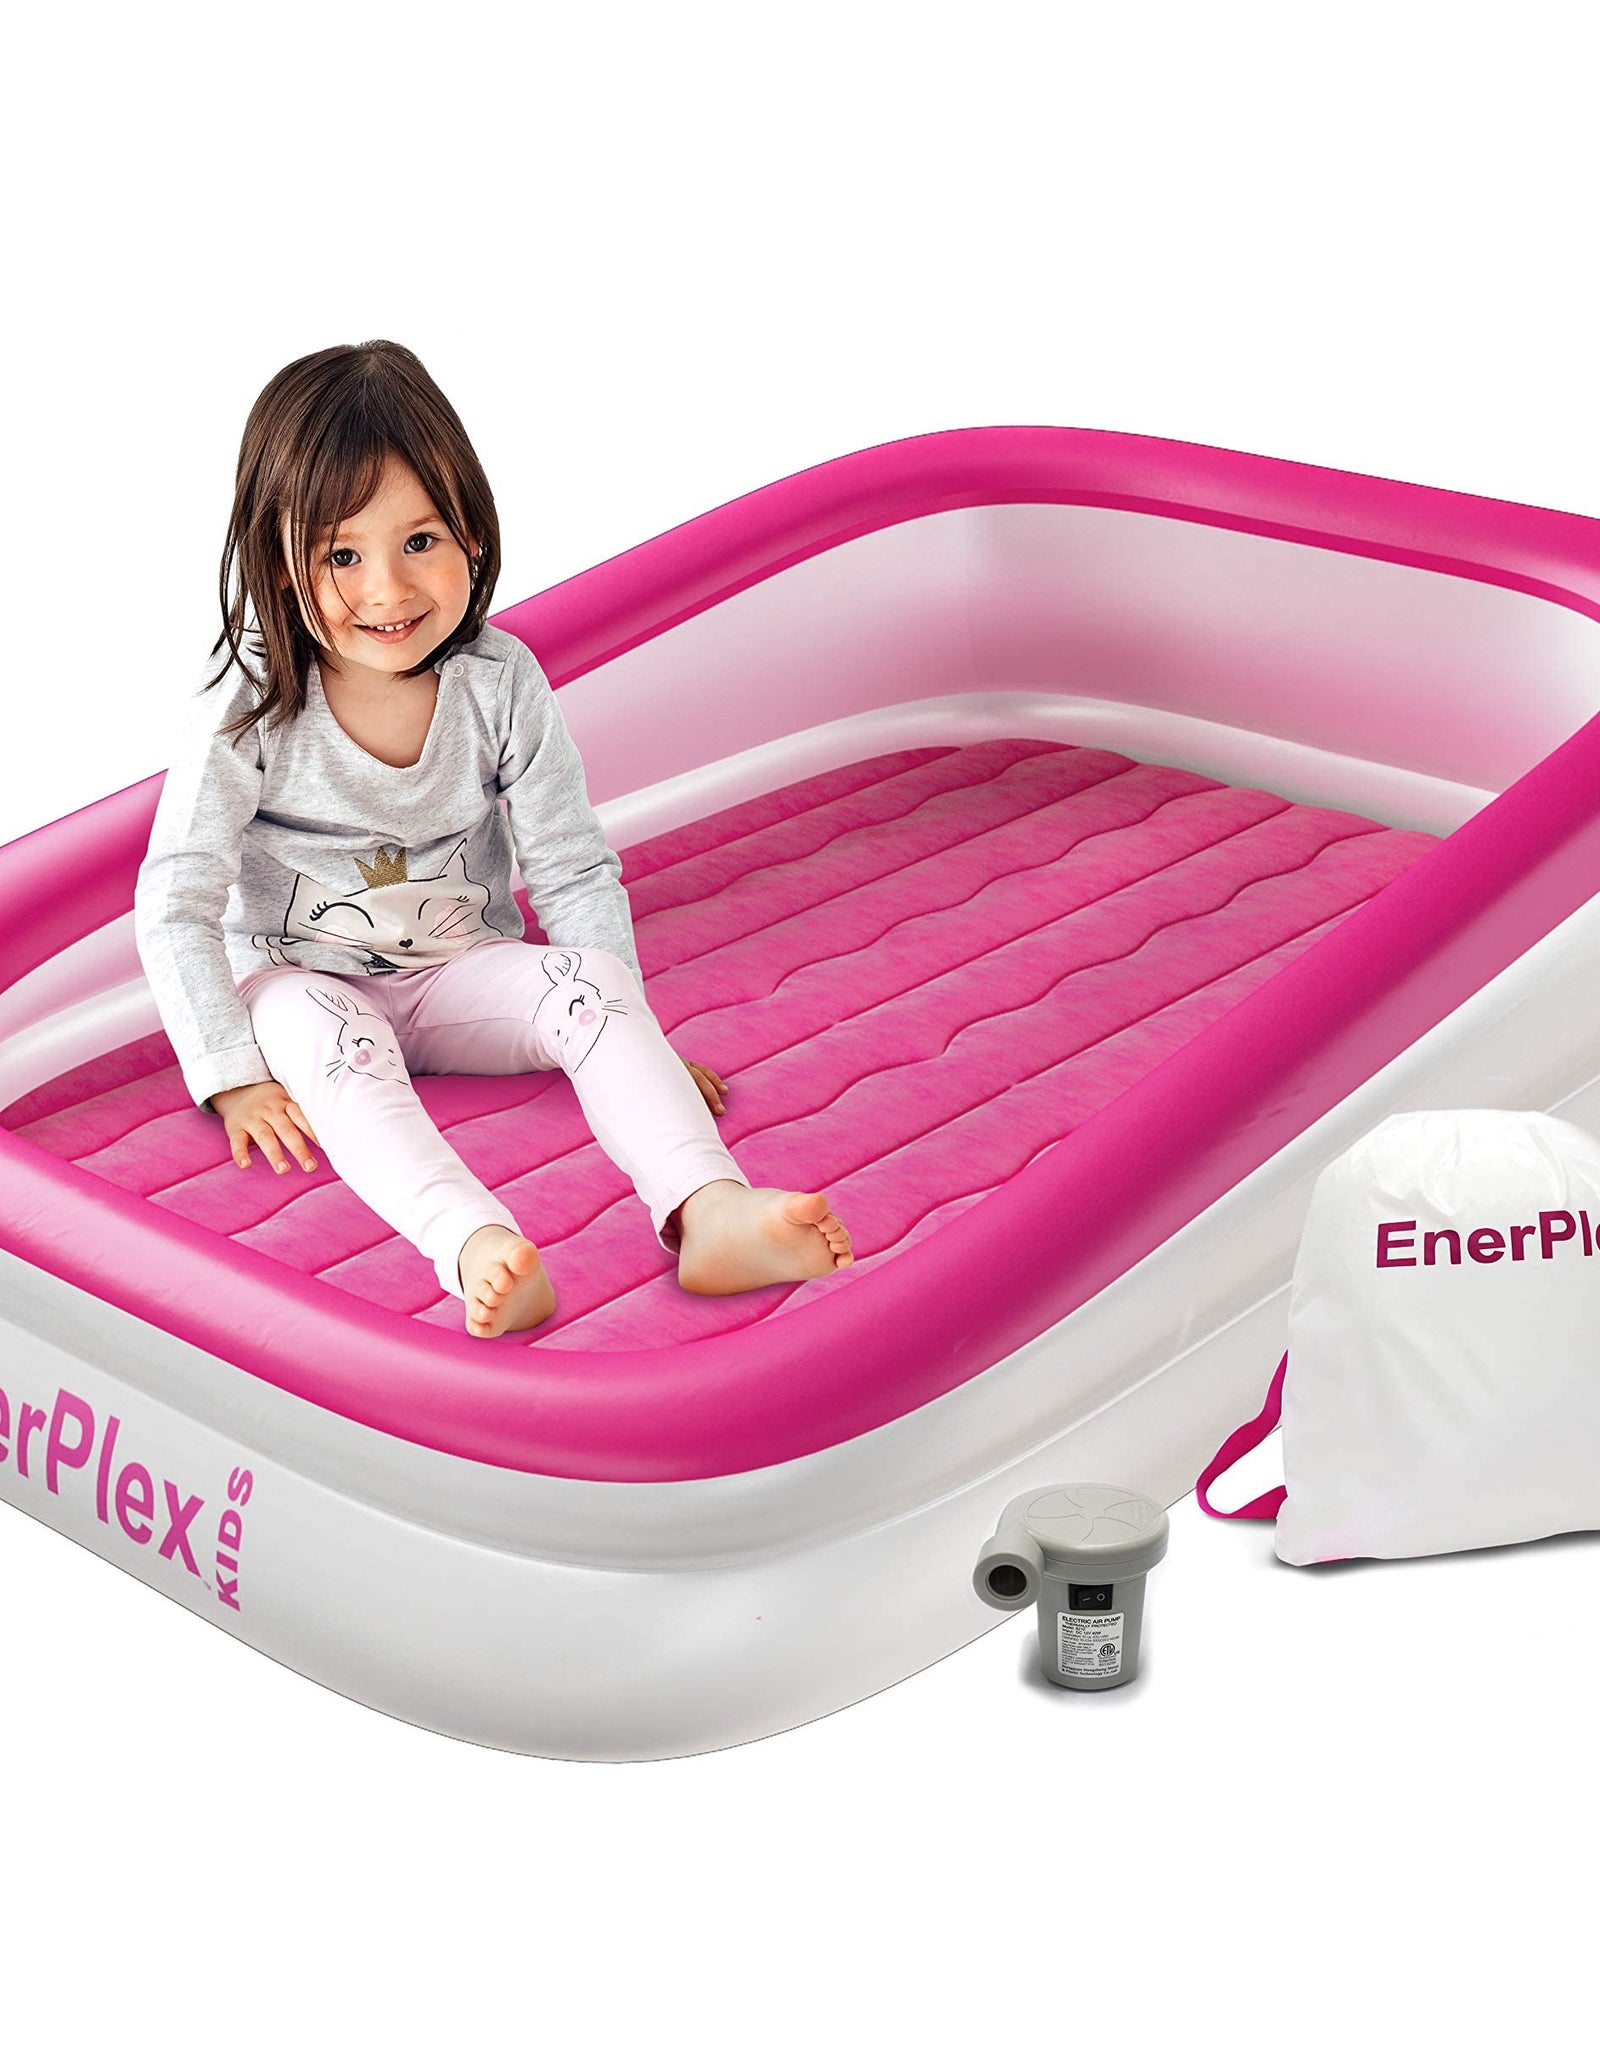 EnerPlex Inflatable Toddler Travel Bed – Portable Kids Air Mattress for Travel, Camping or Hotels w/ Built in Safety Bumpers & High Speed Pump, Puncture Resistant, Compact Size - Blue